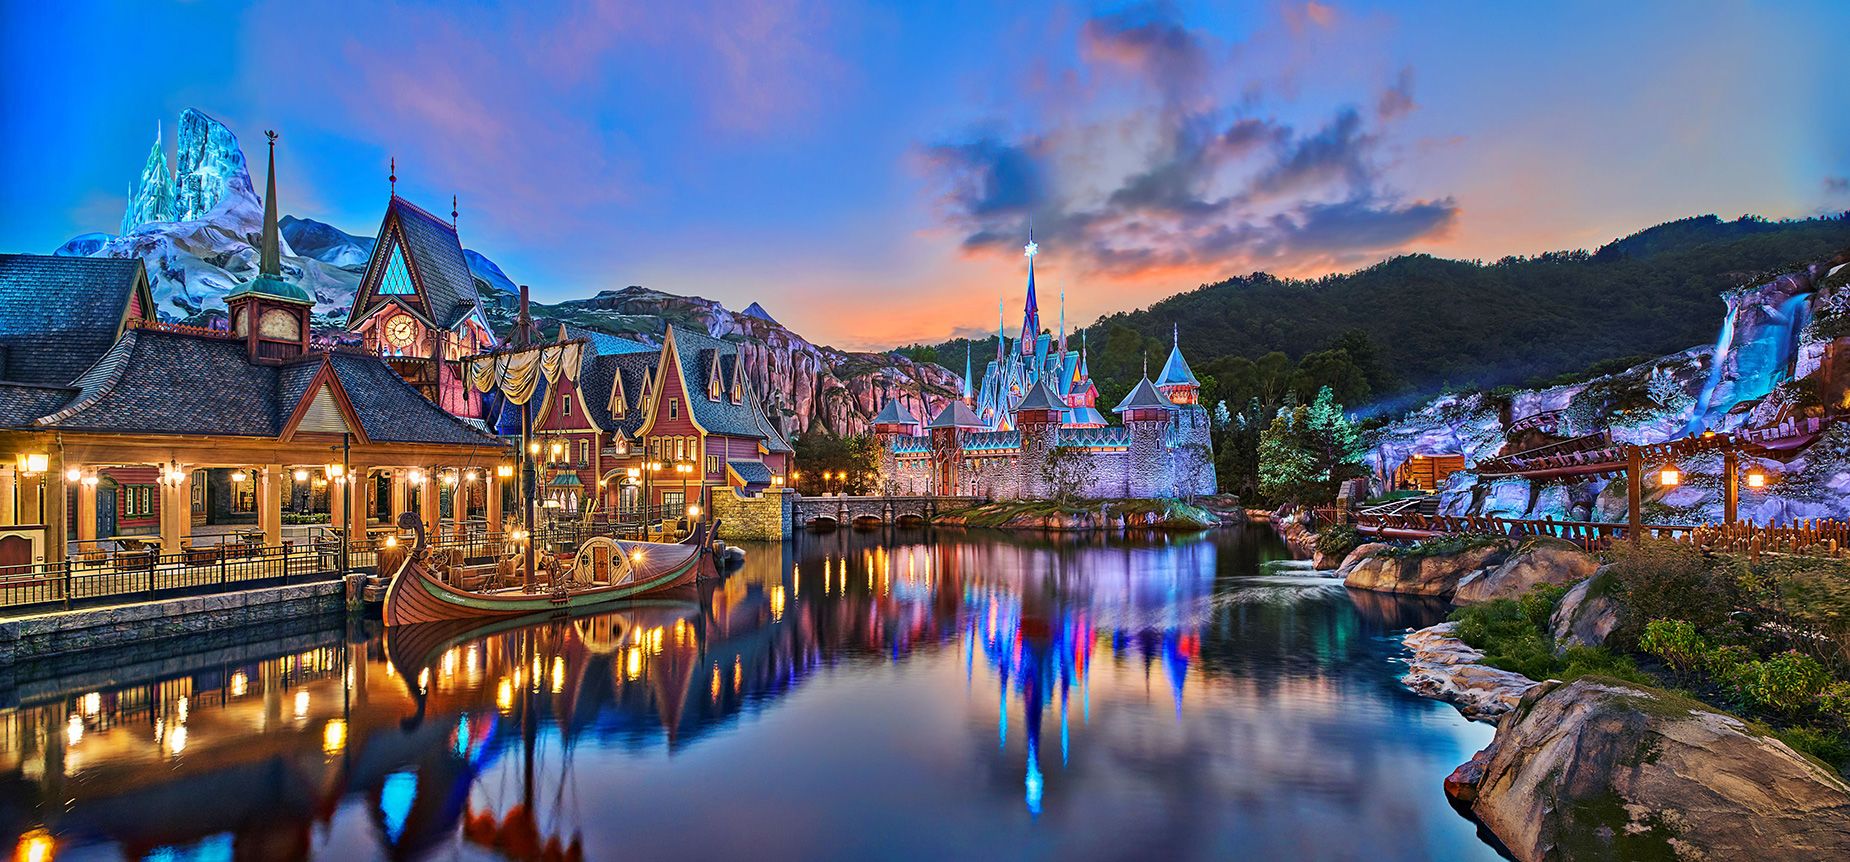 World of Frozen aims to bring the fictional kingdom of Arendelle to life.